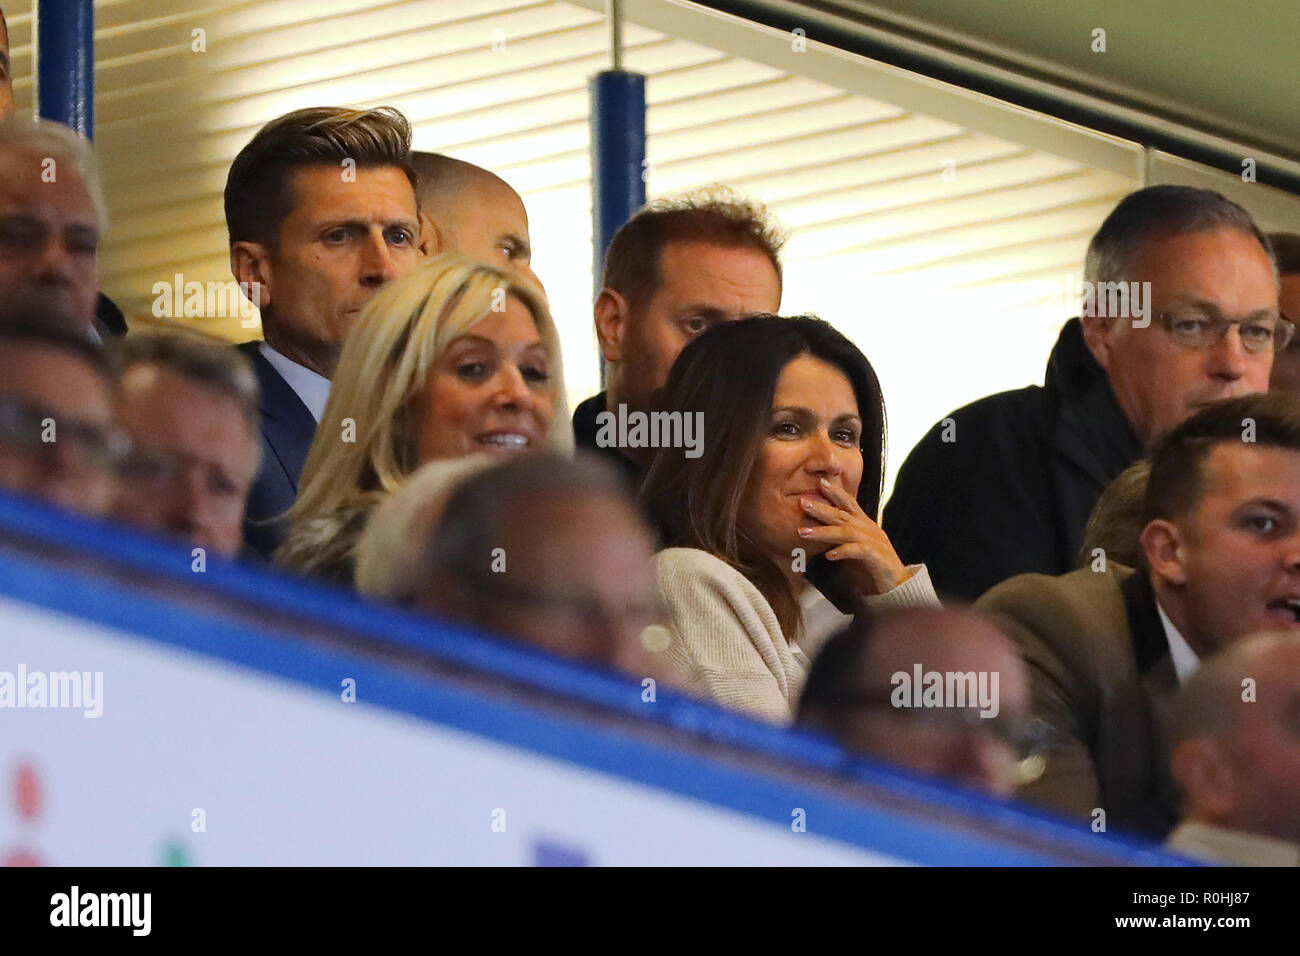 TV Presenter, Susanna Reid watches with Crystal Palace chairman Steve Parish - Chelsea v Crystal Palace, Premier League, Stamford Bridge, London - 4th November 2018 STRICTLY EDITORIAL USE ONLY